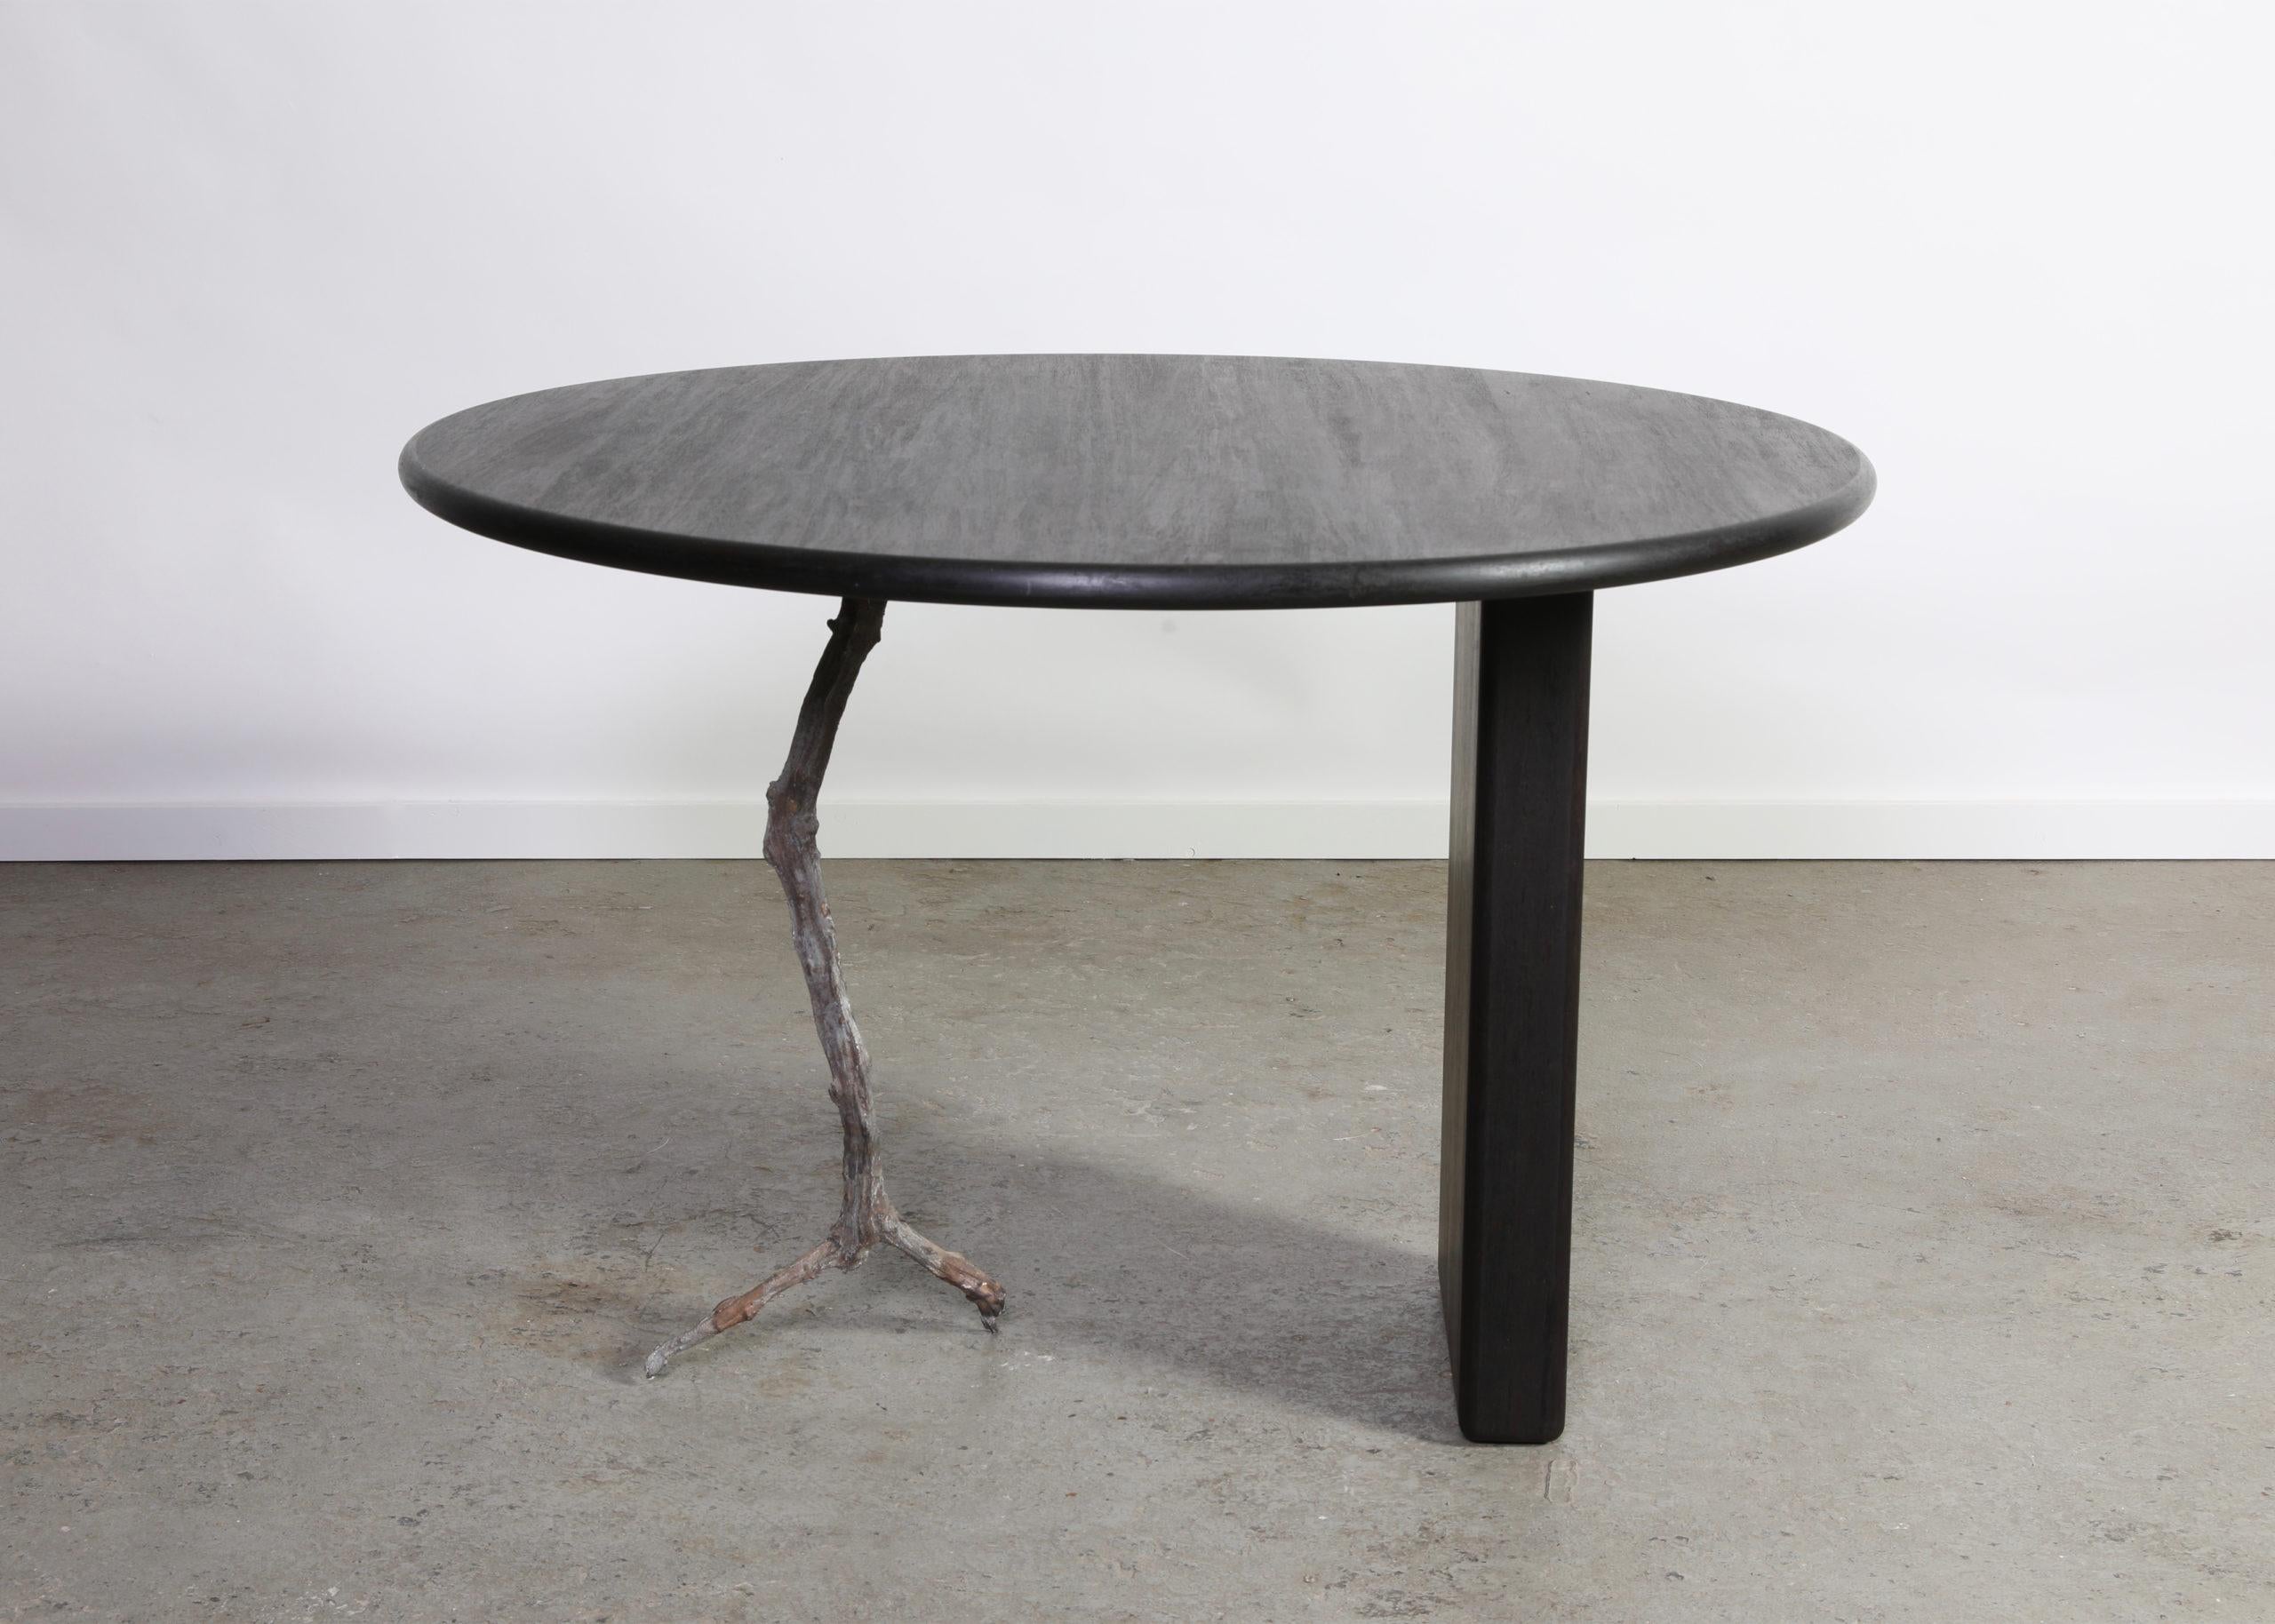 Contemporary Round Dining Table - Treebone by Jesse Sanderson for WDSTCK

Design: Jesse Sanderson
Material: caramelized bamboo with bronze
Dimensions: dia 110 x h 75 cm / dia 43 1/3 x h 29 1/2 inch

Handcrafted in The Netherlands

Jesse